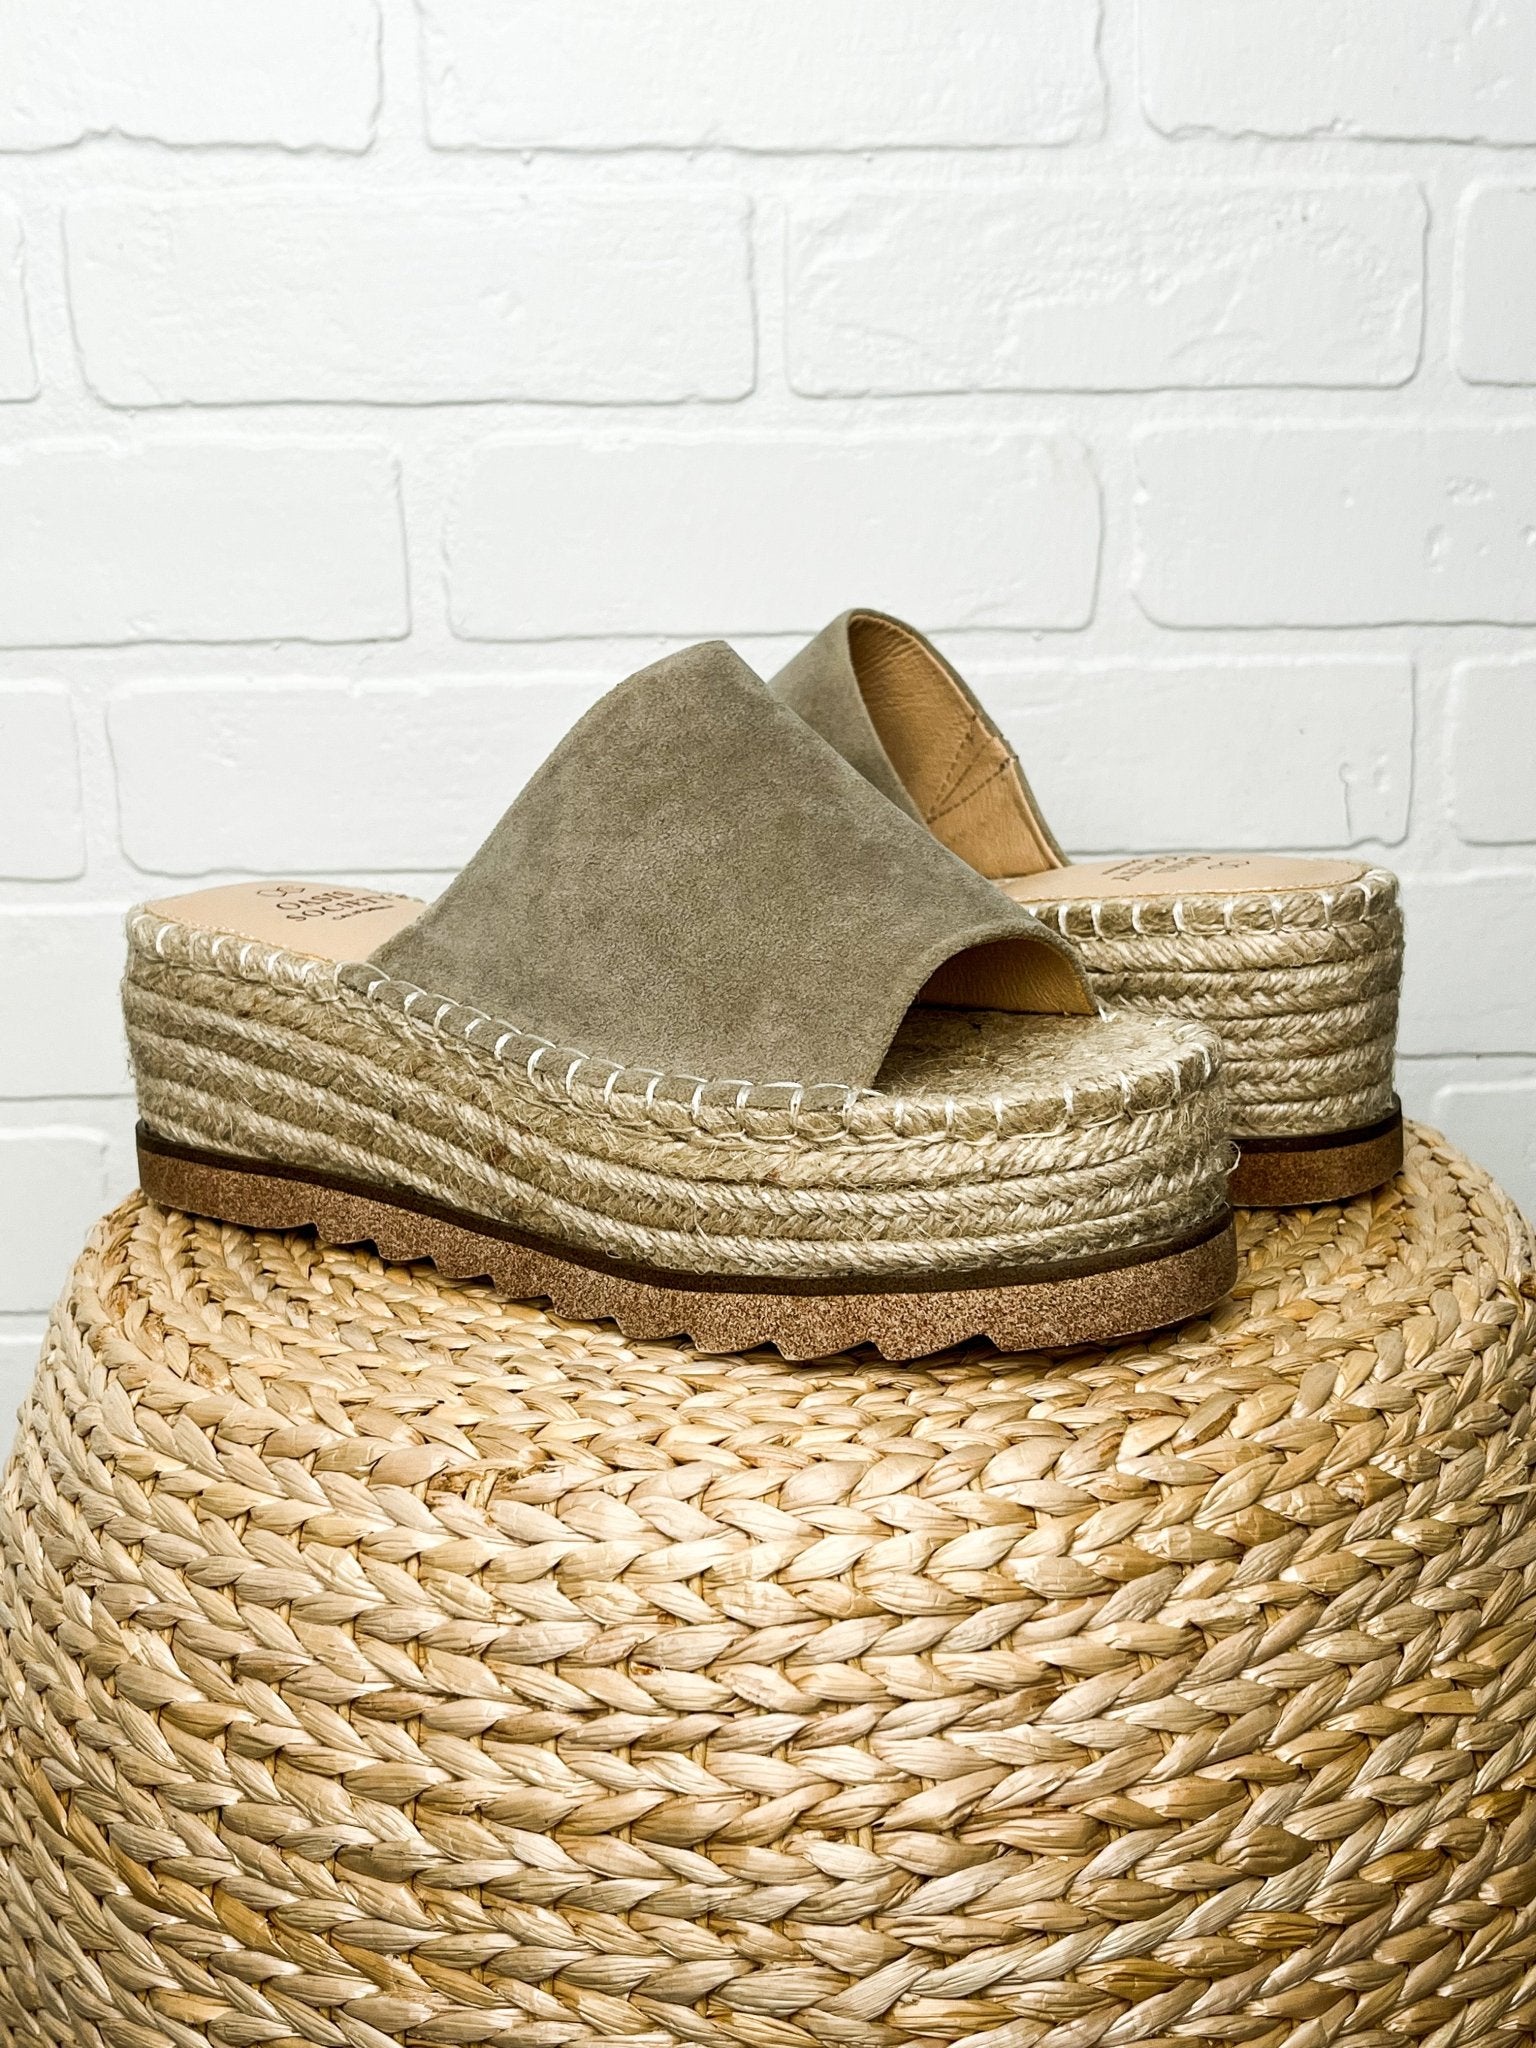 Ivy platform espadrille slide grey - Cute shoes - Trendy Shoes at Lush Fashion Lounge Boutique in Oklahoma City